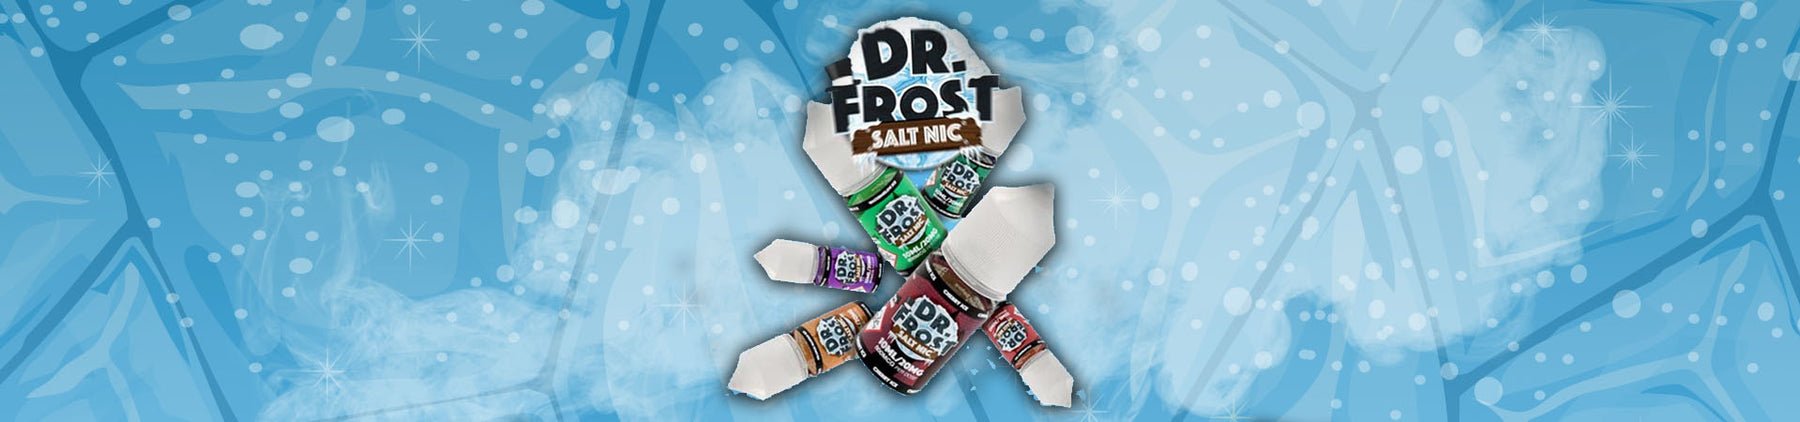 Dr Frost Salt Nic Range! Now Available